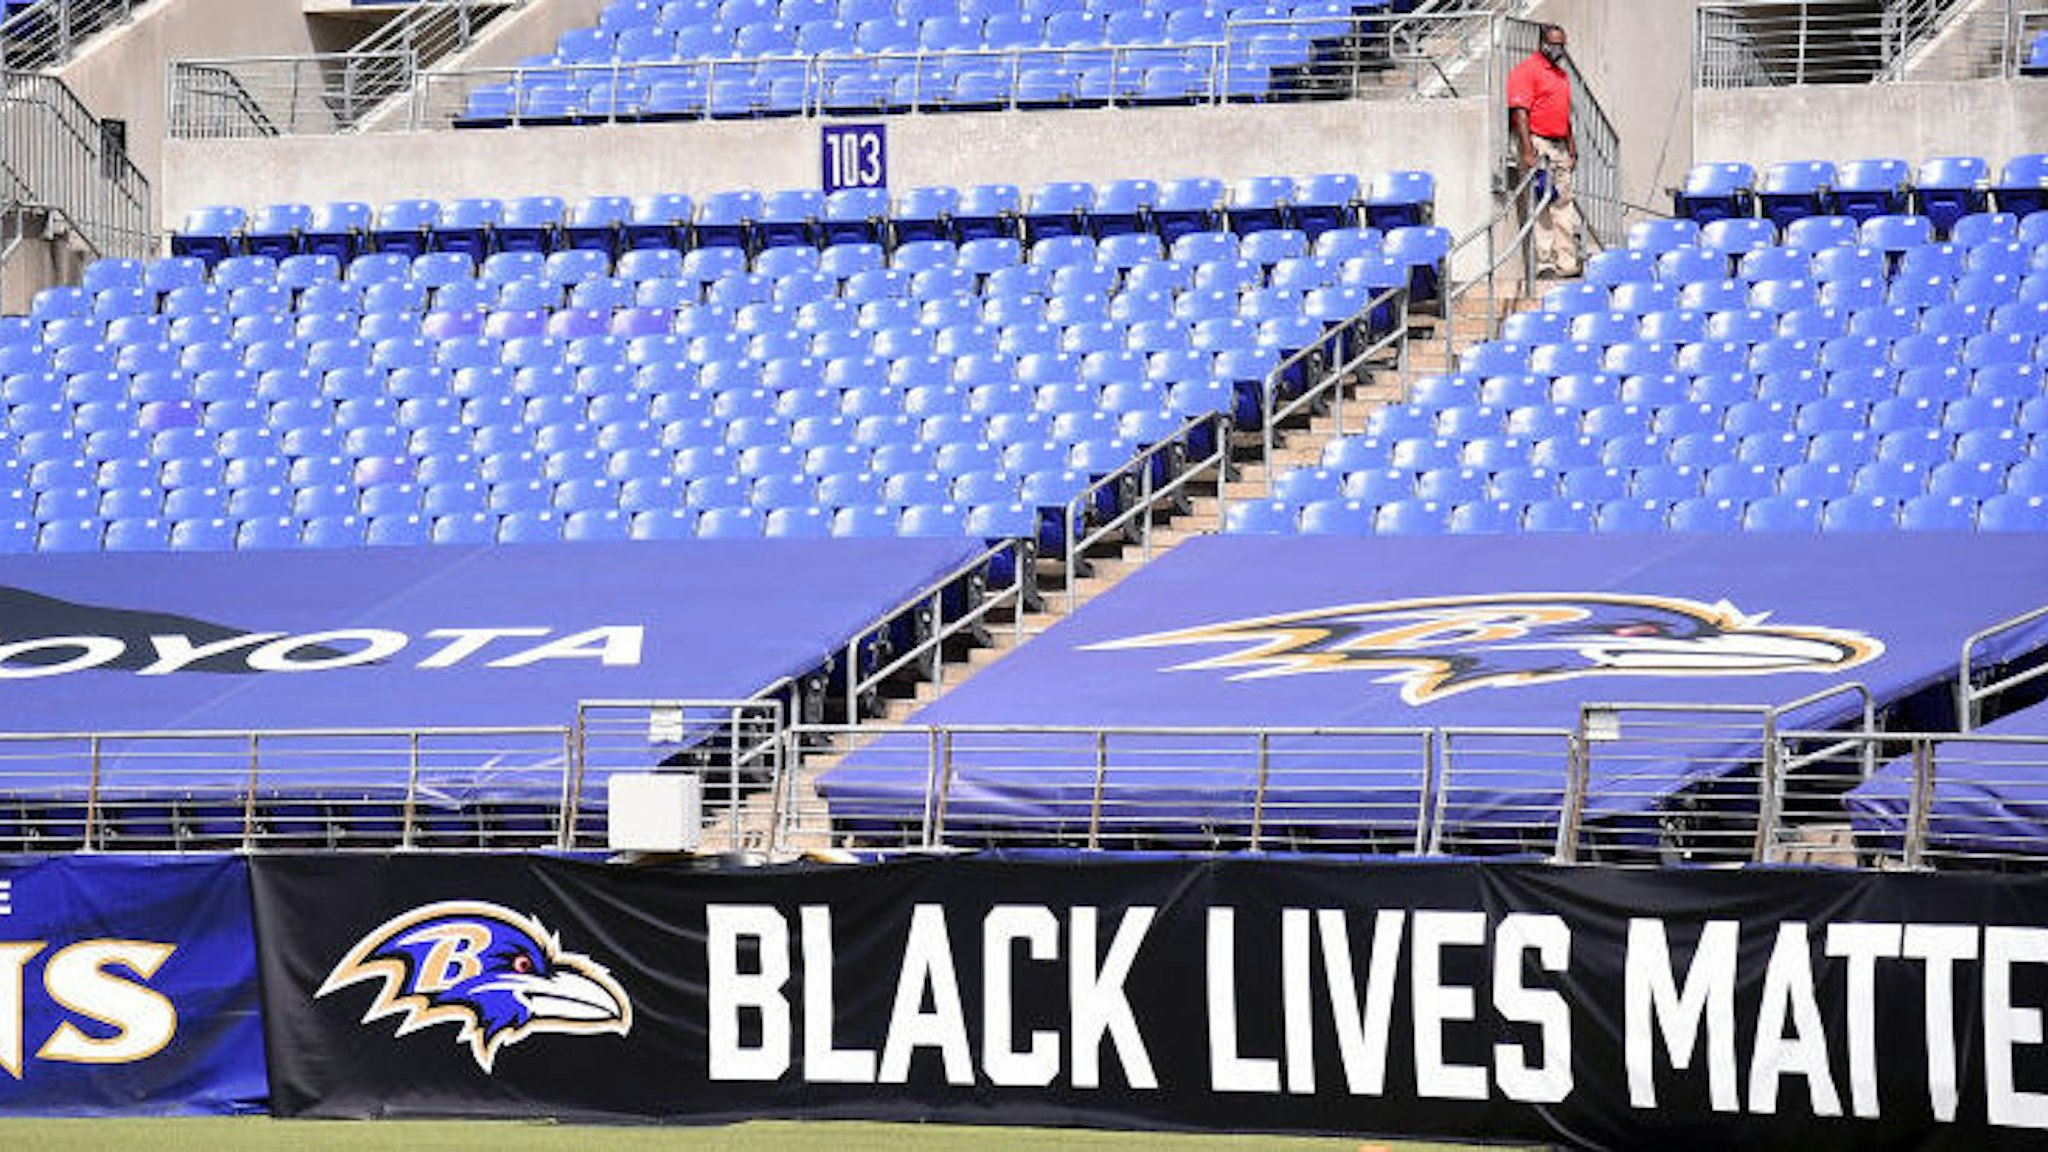 A Black Lives Matter banner is seen during the first half of the game between the Baltimore Ravens and the Cleveland Browns at M&T Bank Stadium on September 13, 2020 in Baltimore, Maryland.